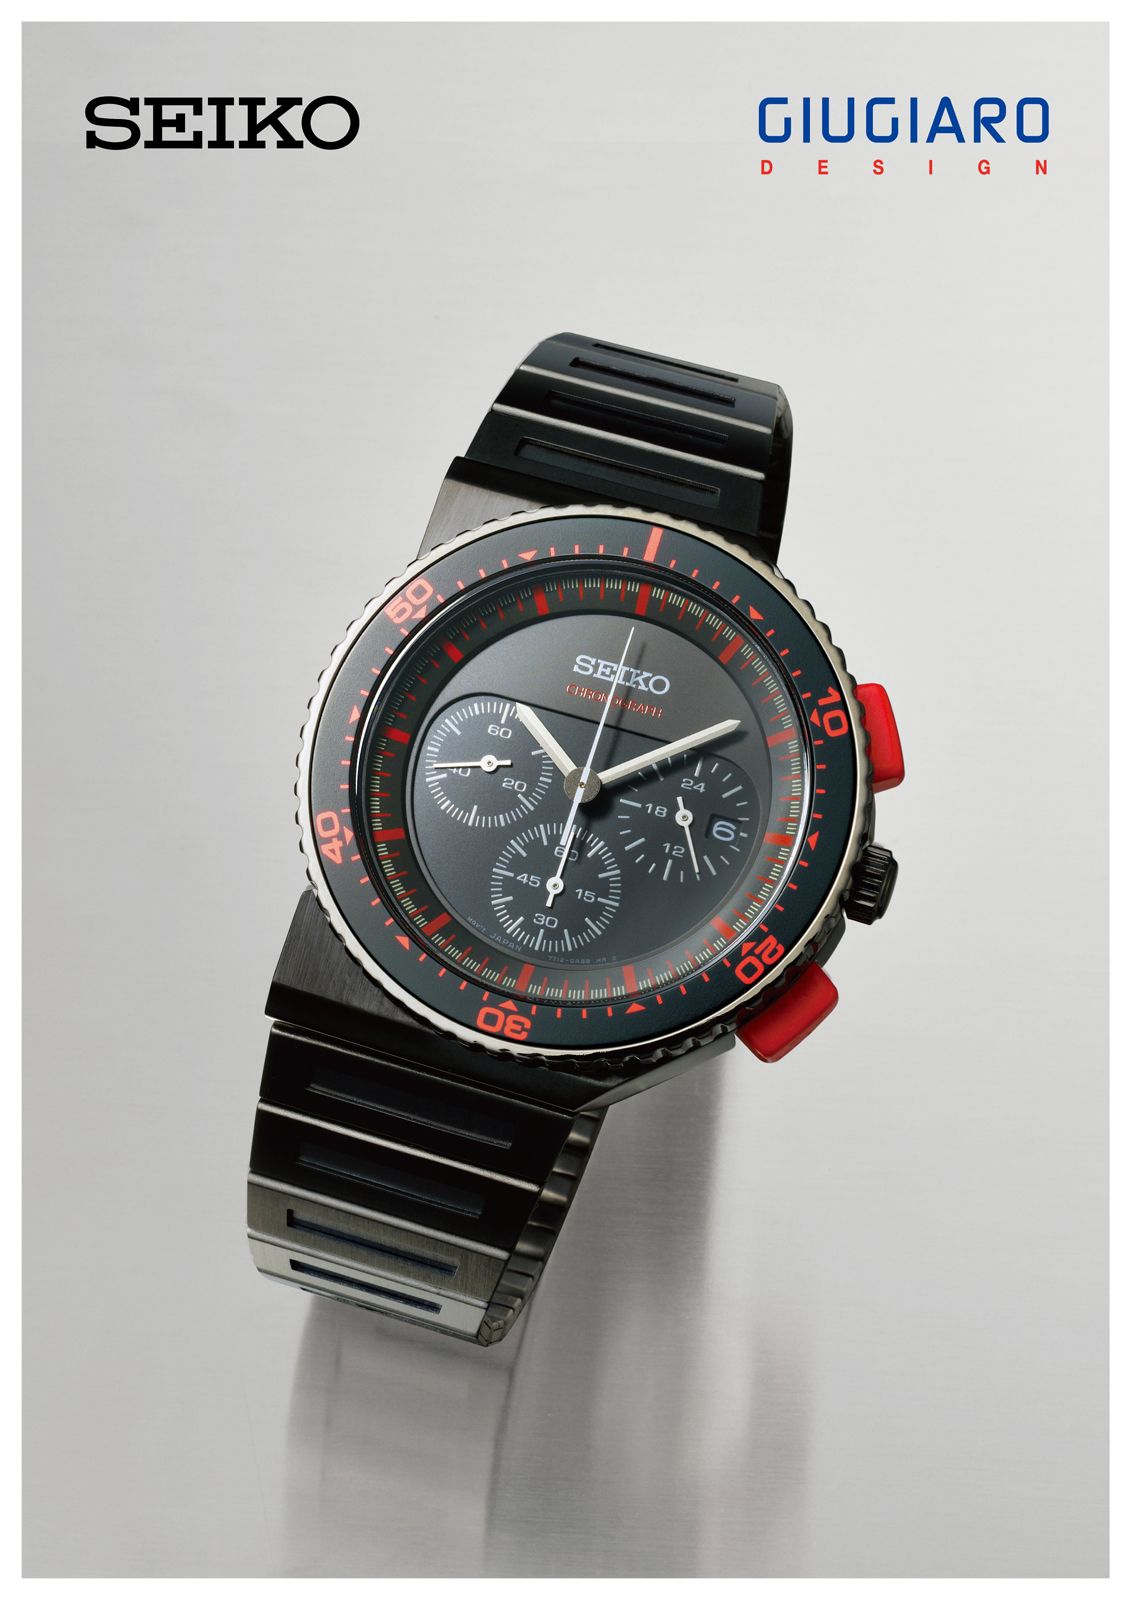 New watches for motorcyclists and car drivers by Seiko & Giugiaro 